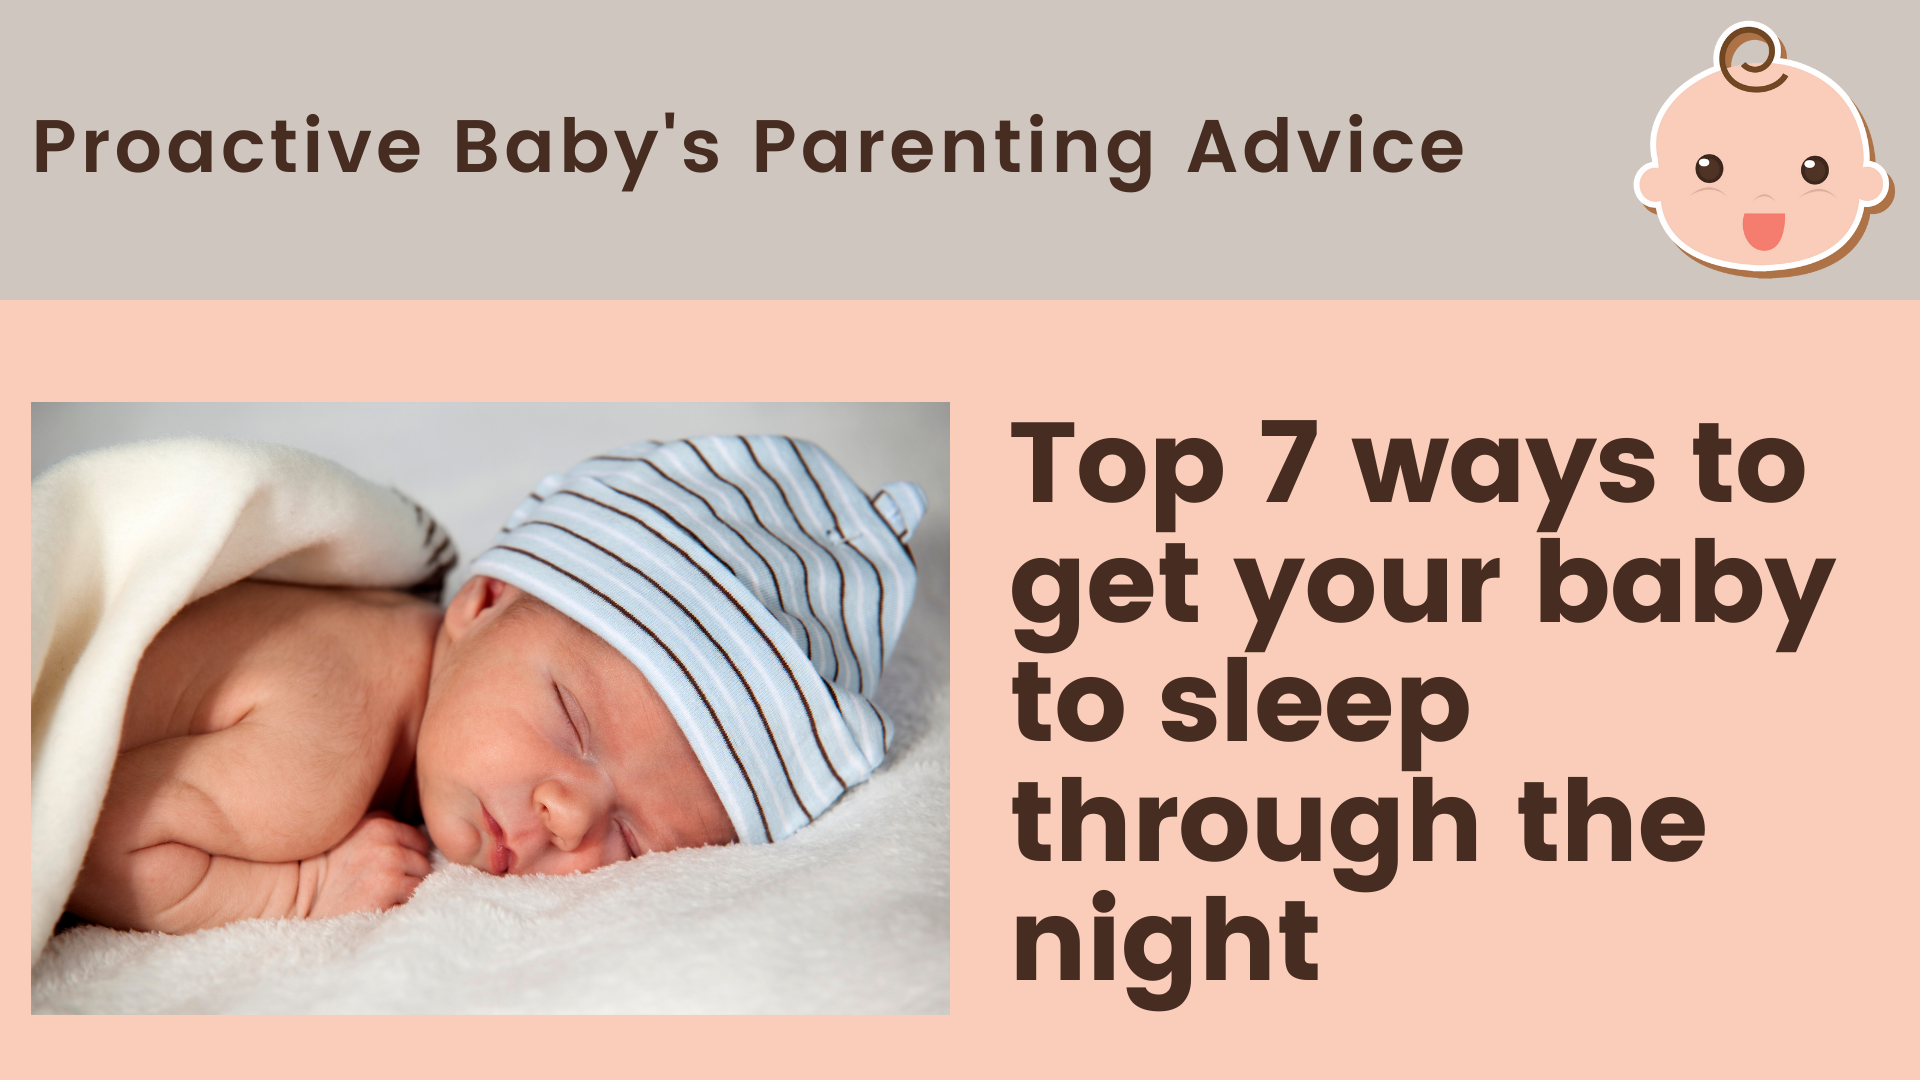 Top 7 ways to get your baby to sleep through the night